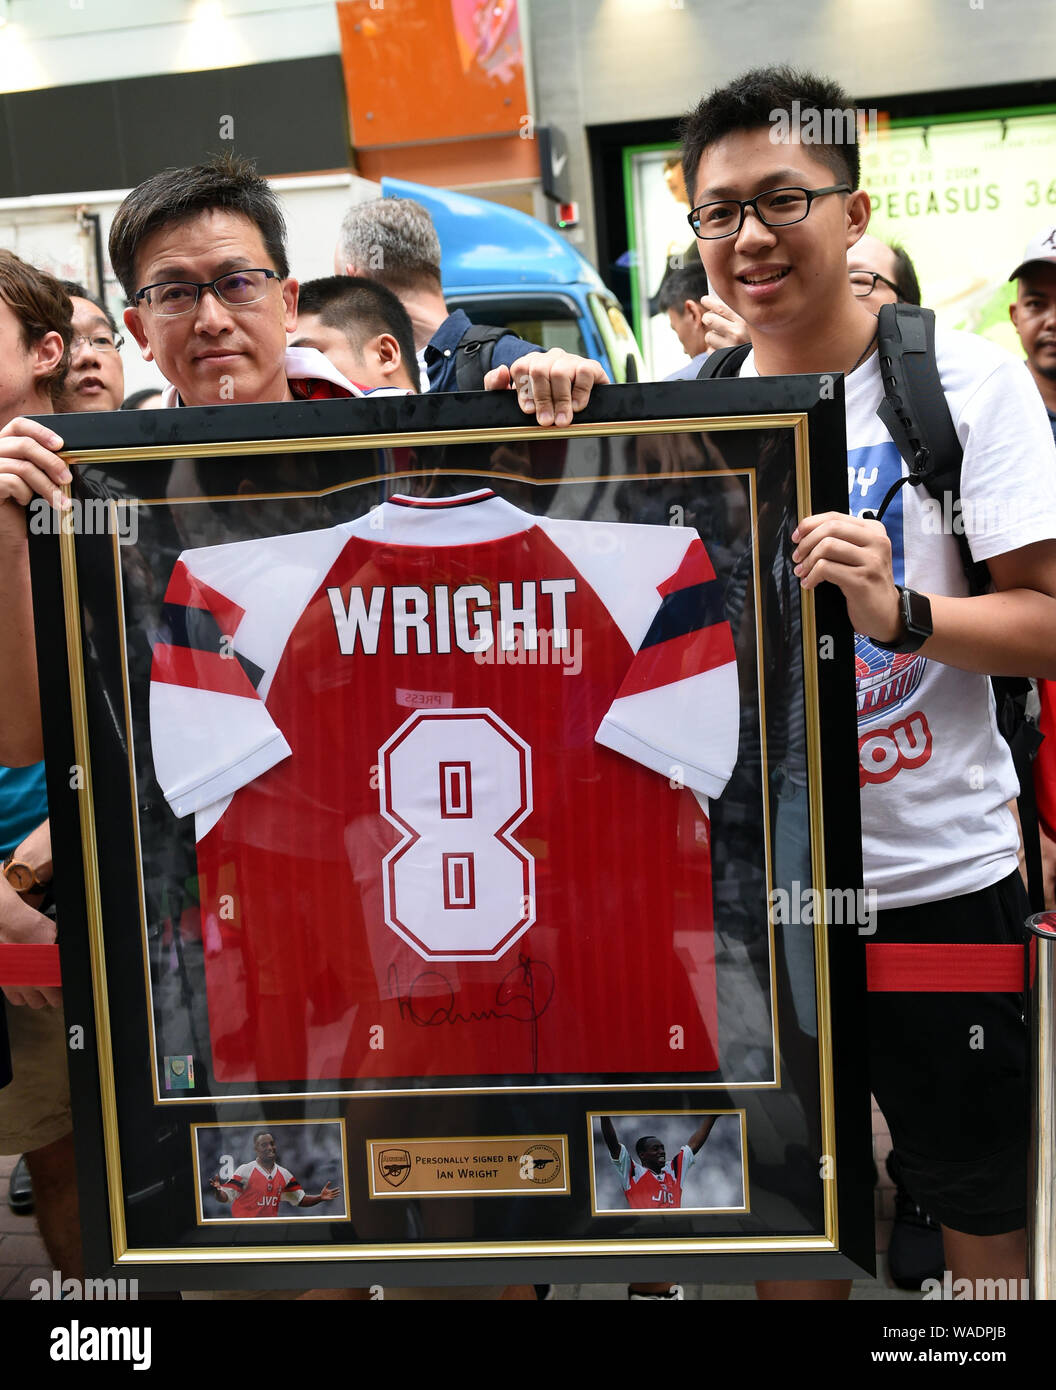 Fans show a team jersey of former English football player Ian Wright during  a promotional event for new team jersey of Arsenal F.C. of English footbal  Stock Photo - Alamy